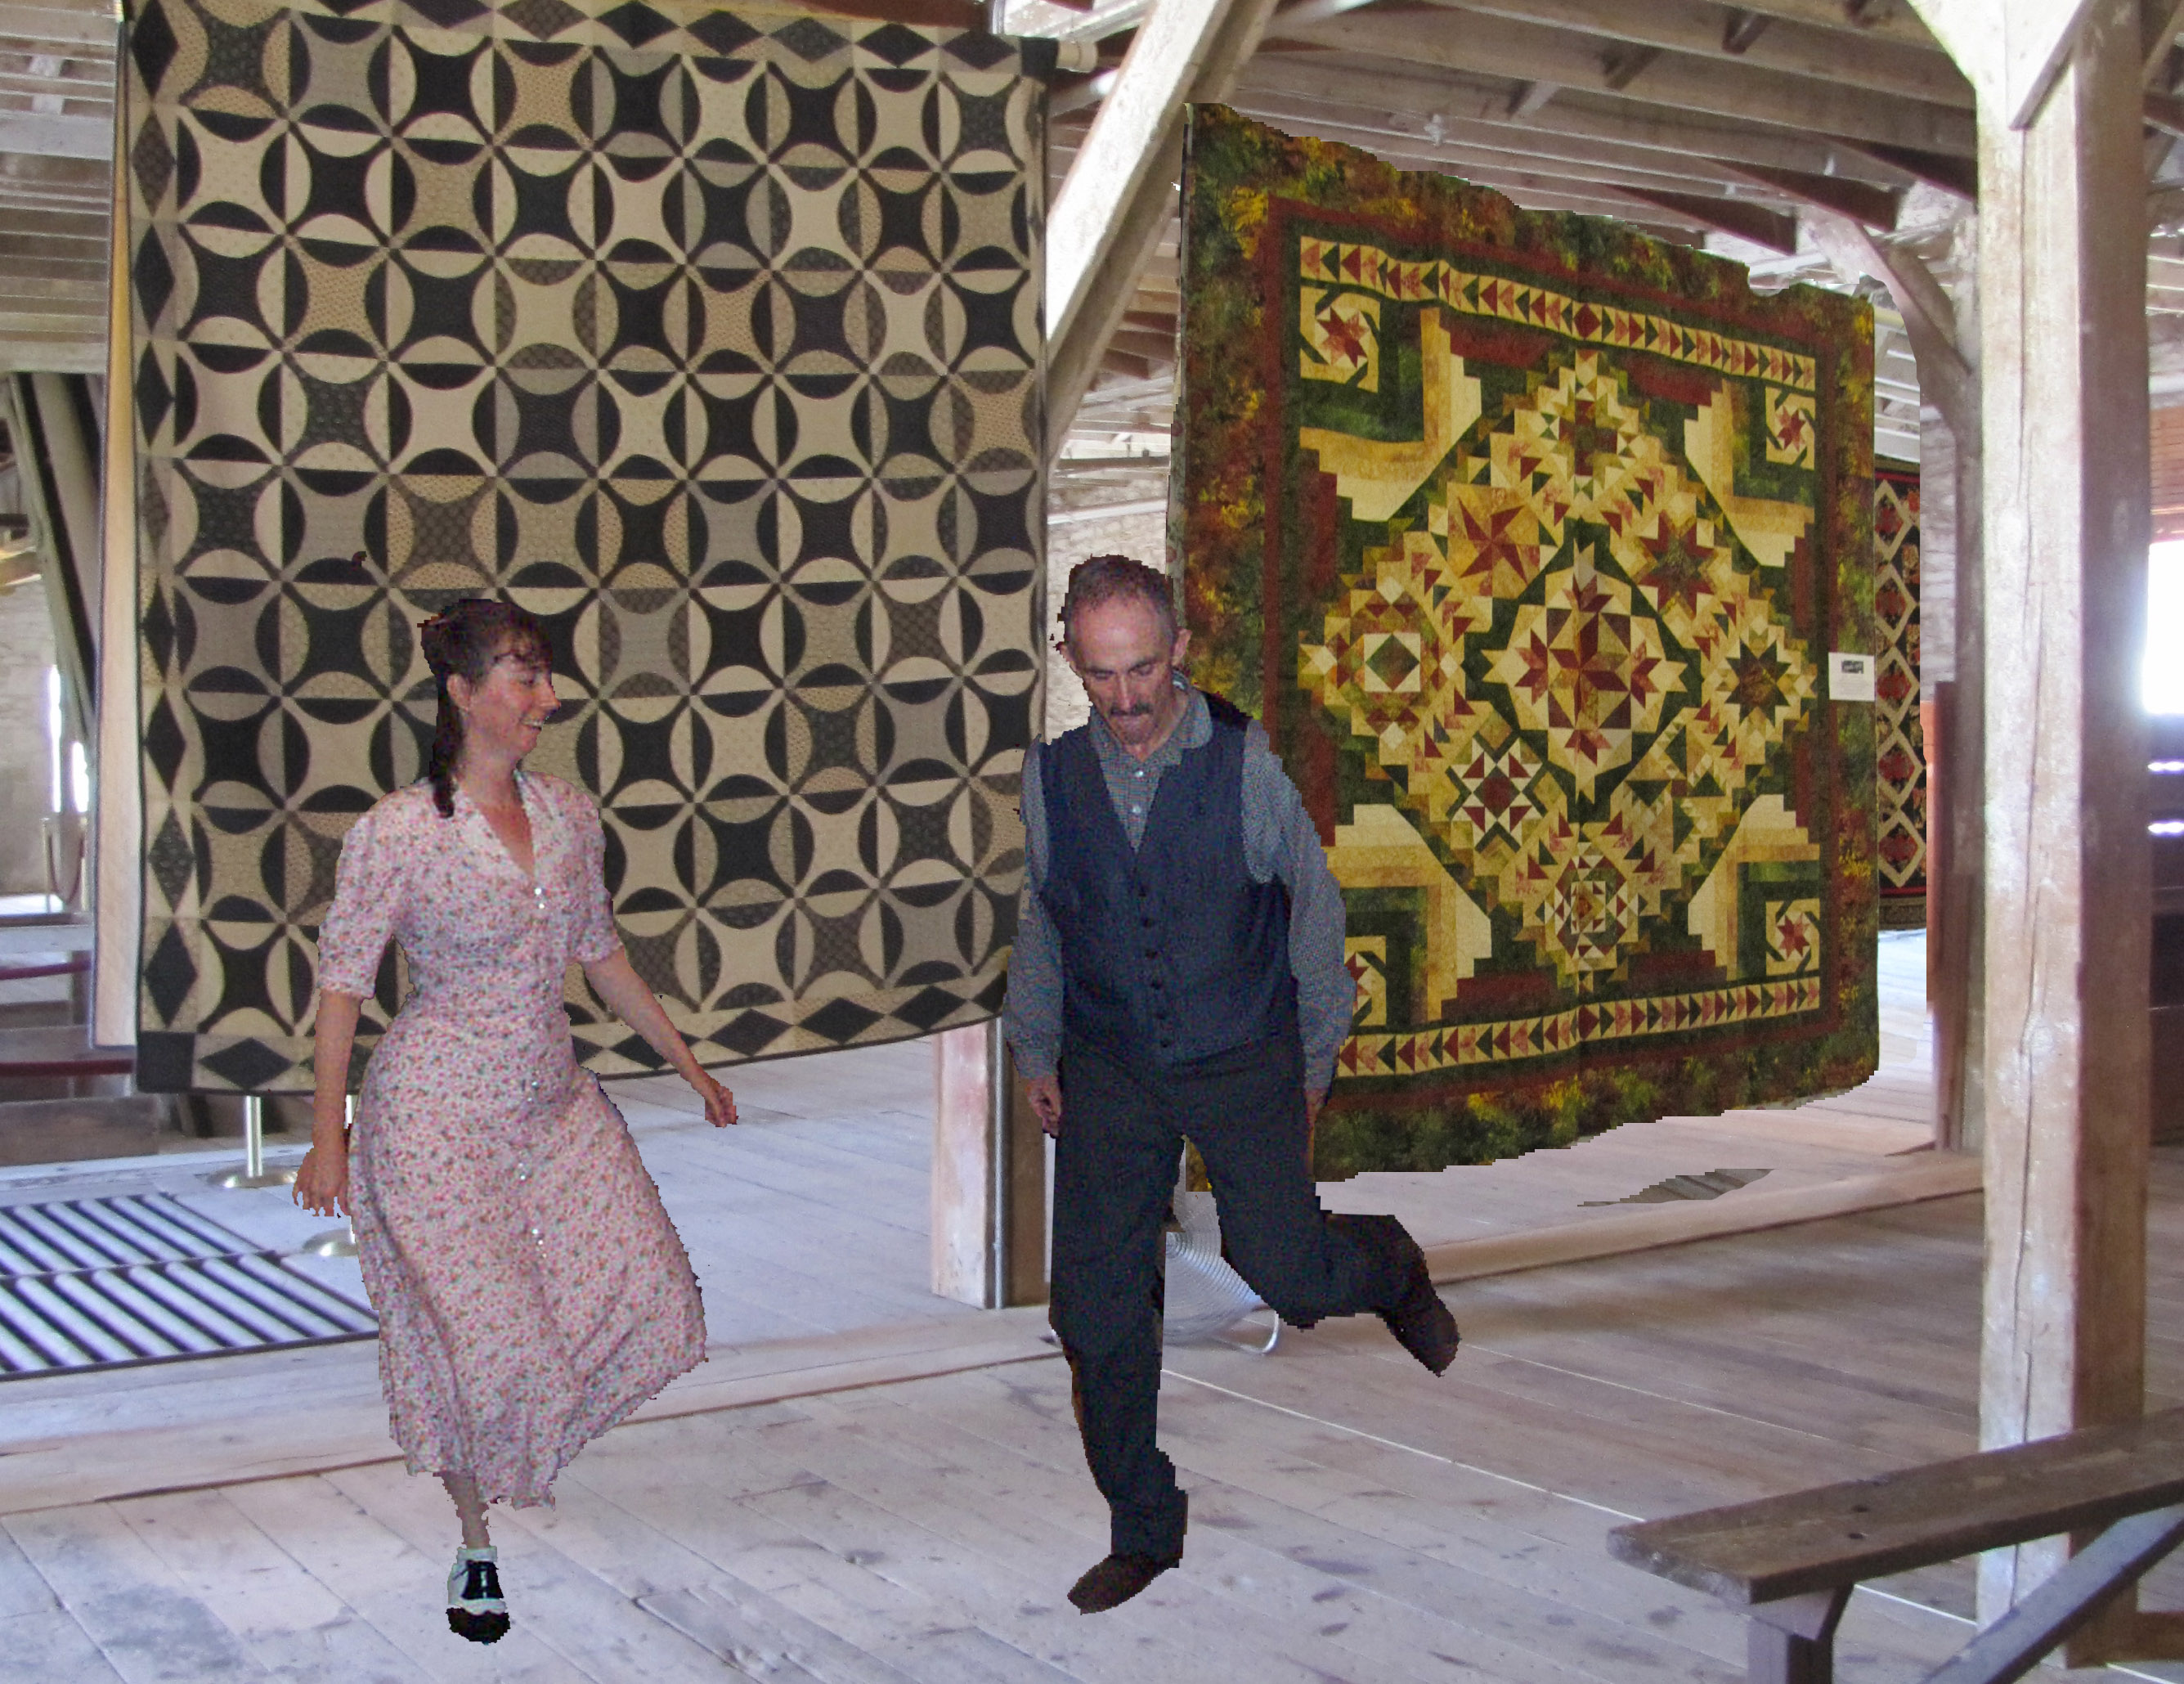 clogging among a background of quilts in an old barn